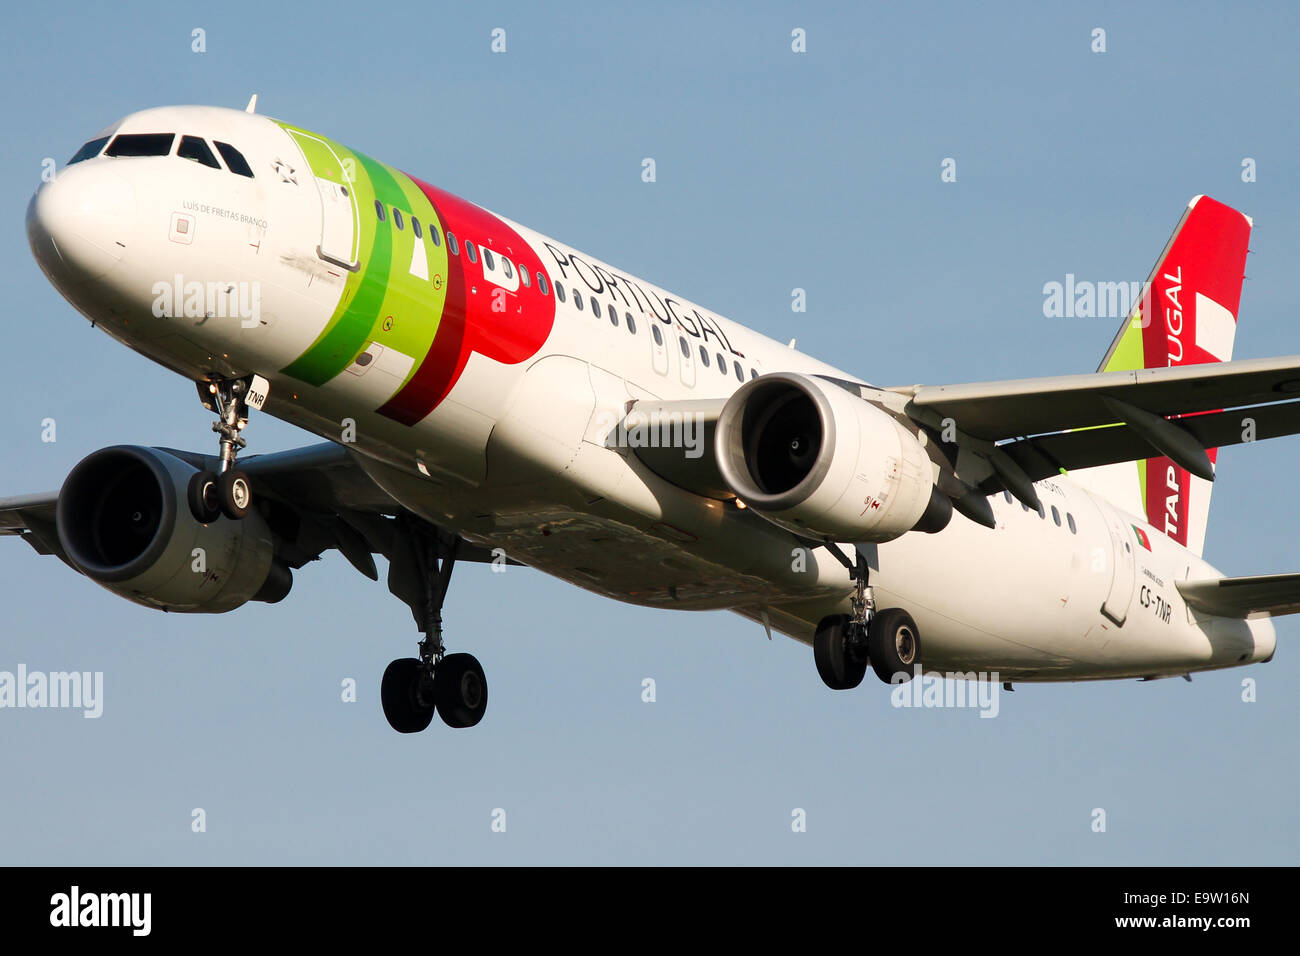 TAP Portugal Airbus A320 approaches runway 27L at London Heathrow Airport. Stock Photo